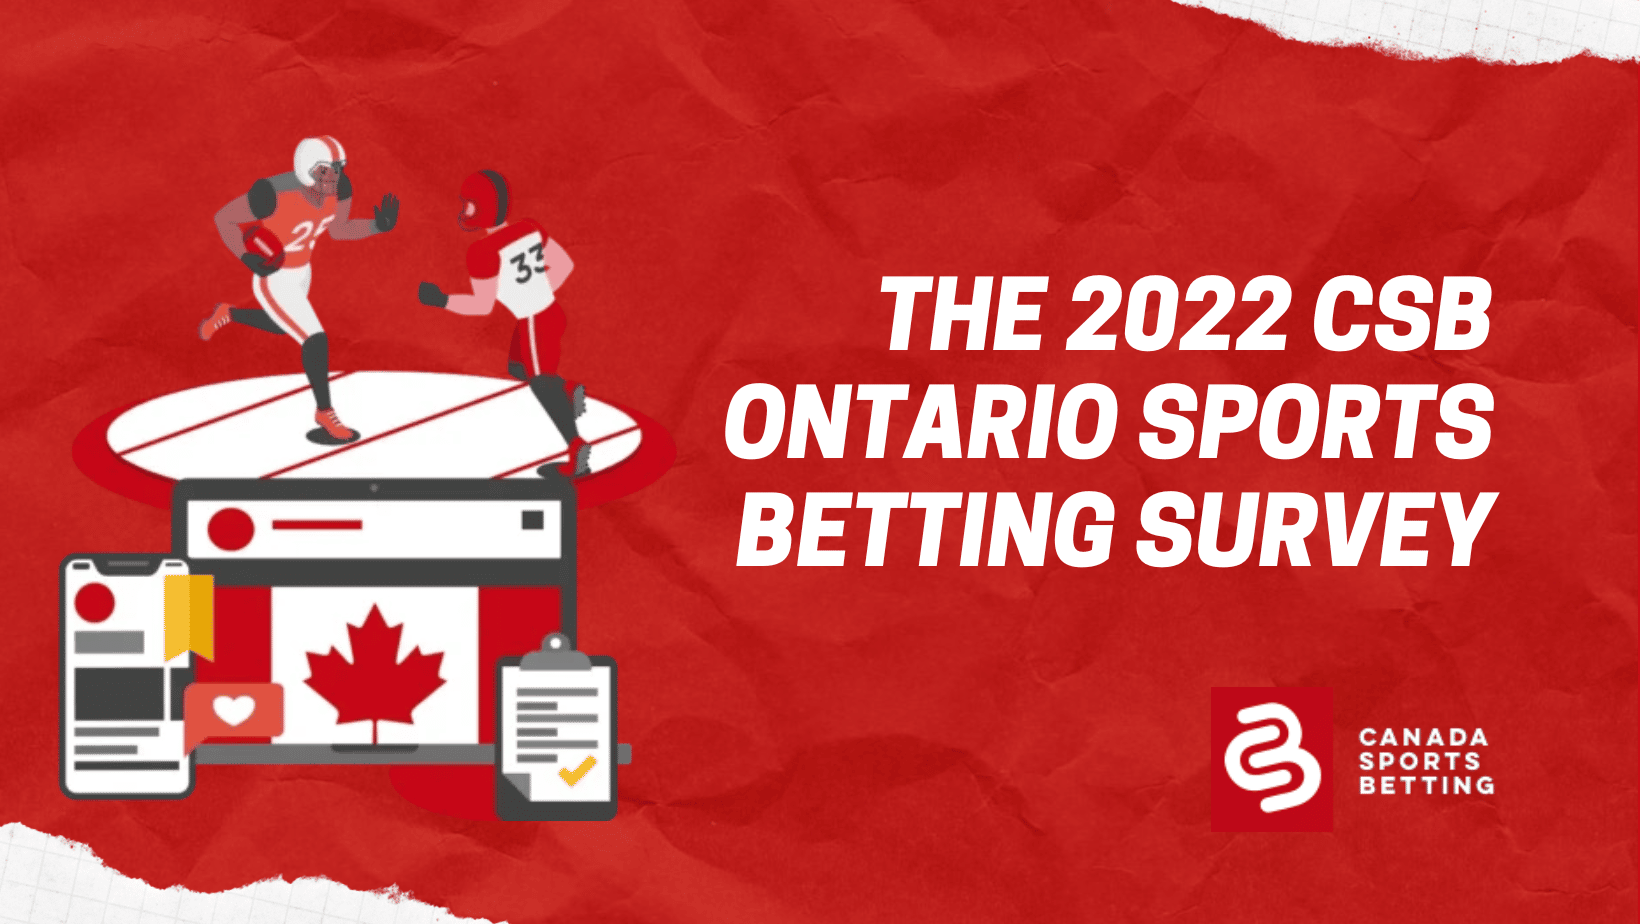 Single-event sports betting now available online in Manitoba